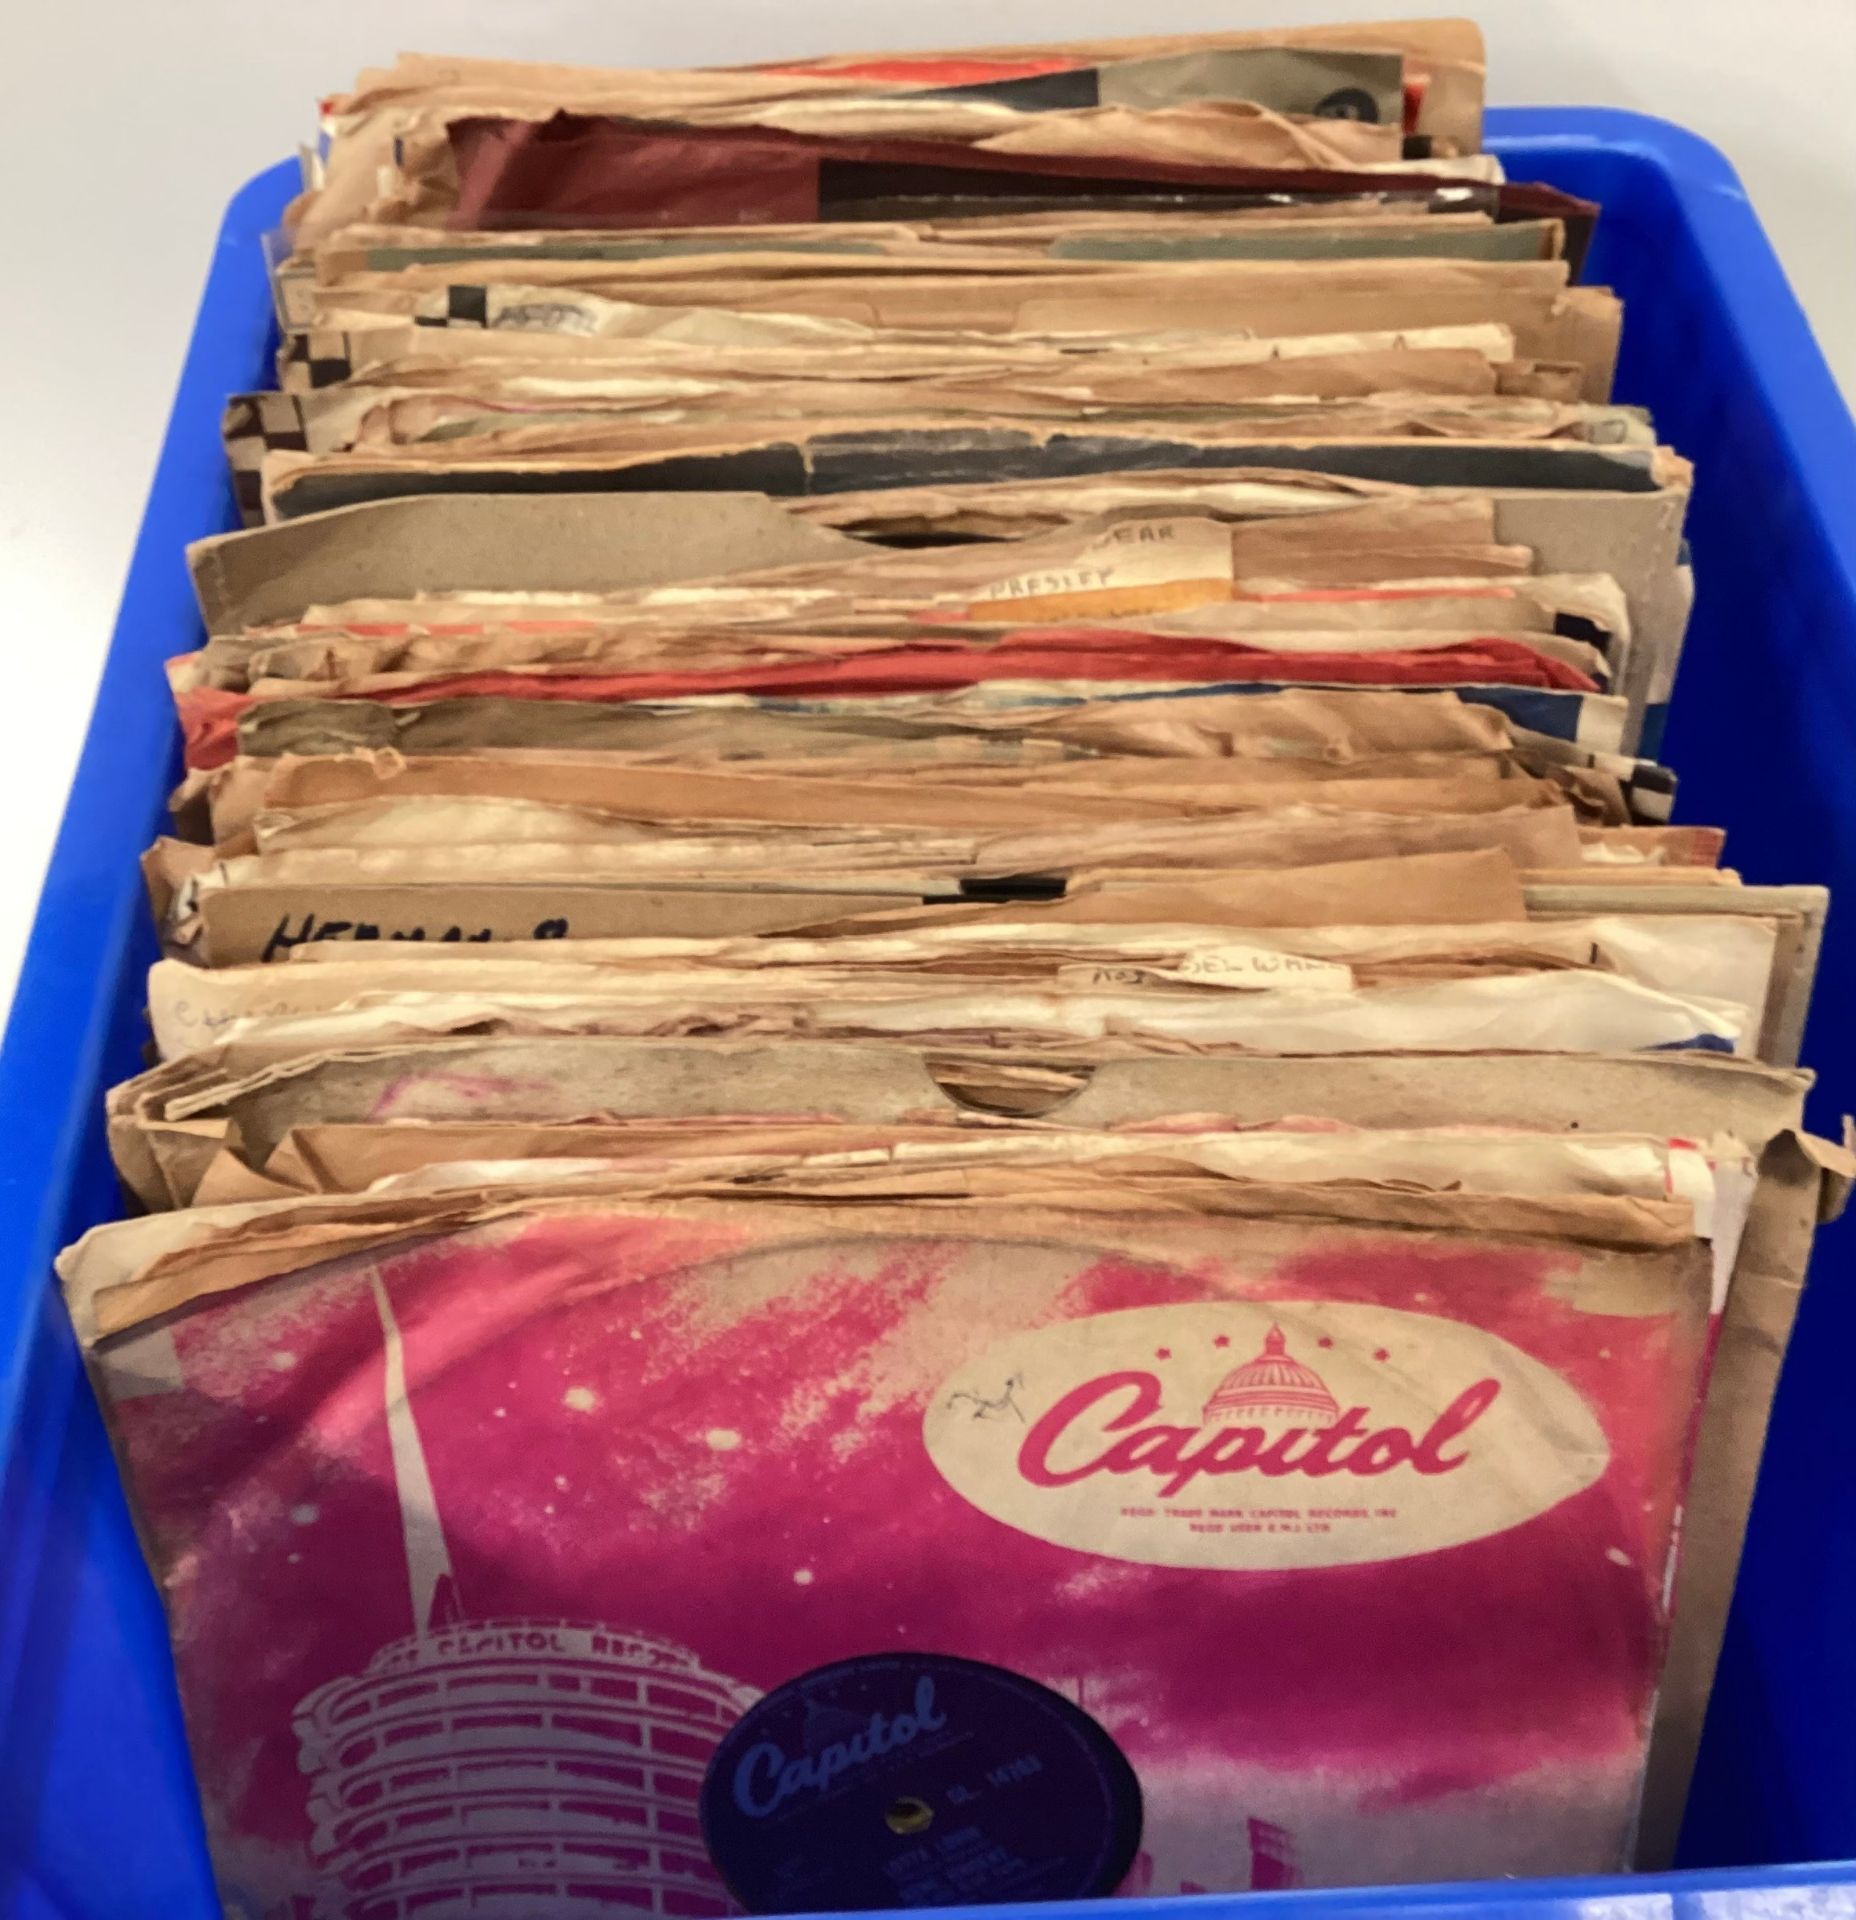 LARGE BOX OF SHELLAC 78RPM ROCK AND POP RECORDS. This container has artists to include - Johnny